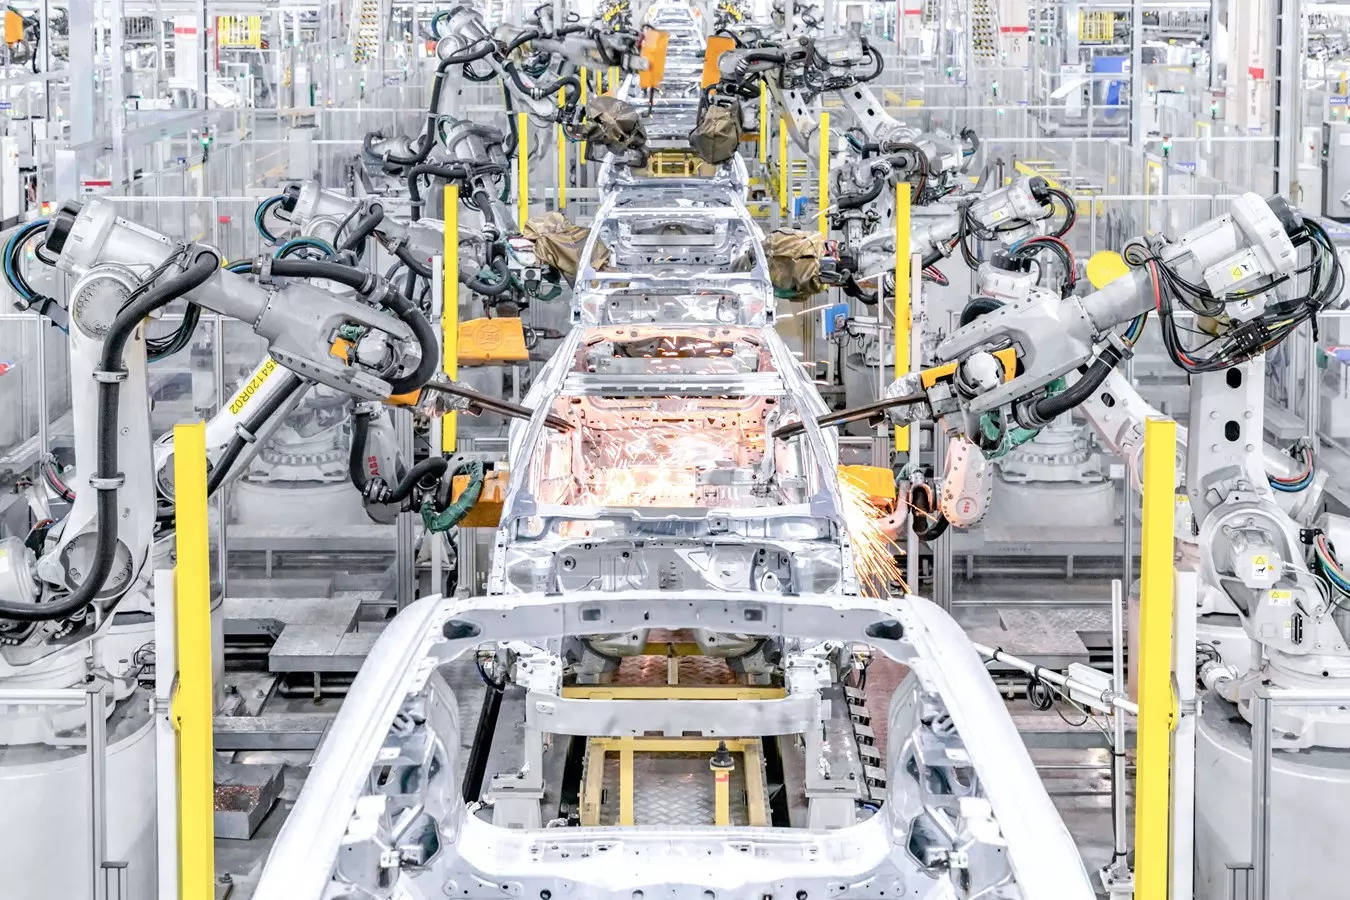  Last year, the carmaker announced a collaboration with Swedish steelmaker SSAB to jointly explore the development of fossil-free, high-quality steel for use in the automotive industry through SSAB’s HYBRIT initiative.